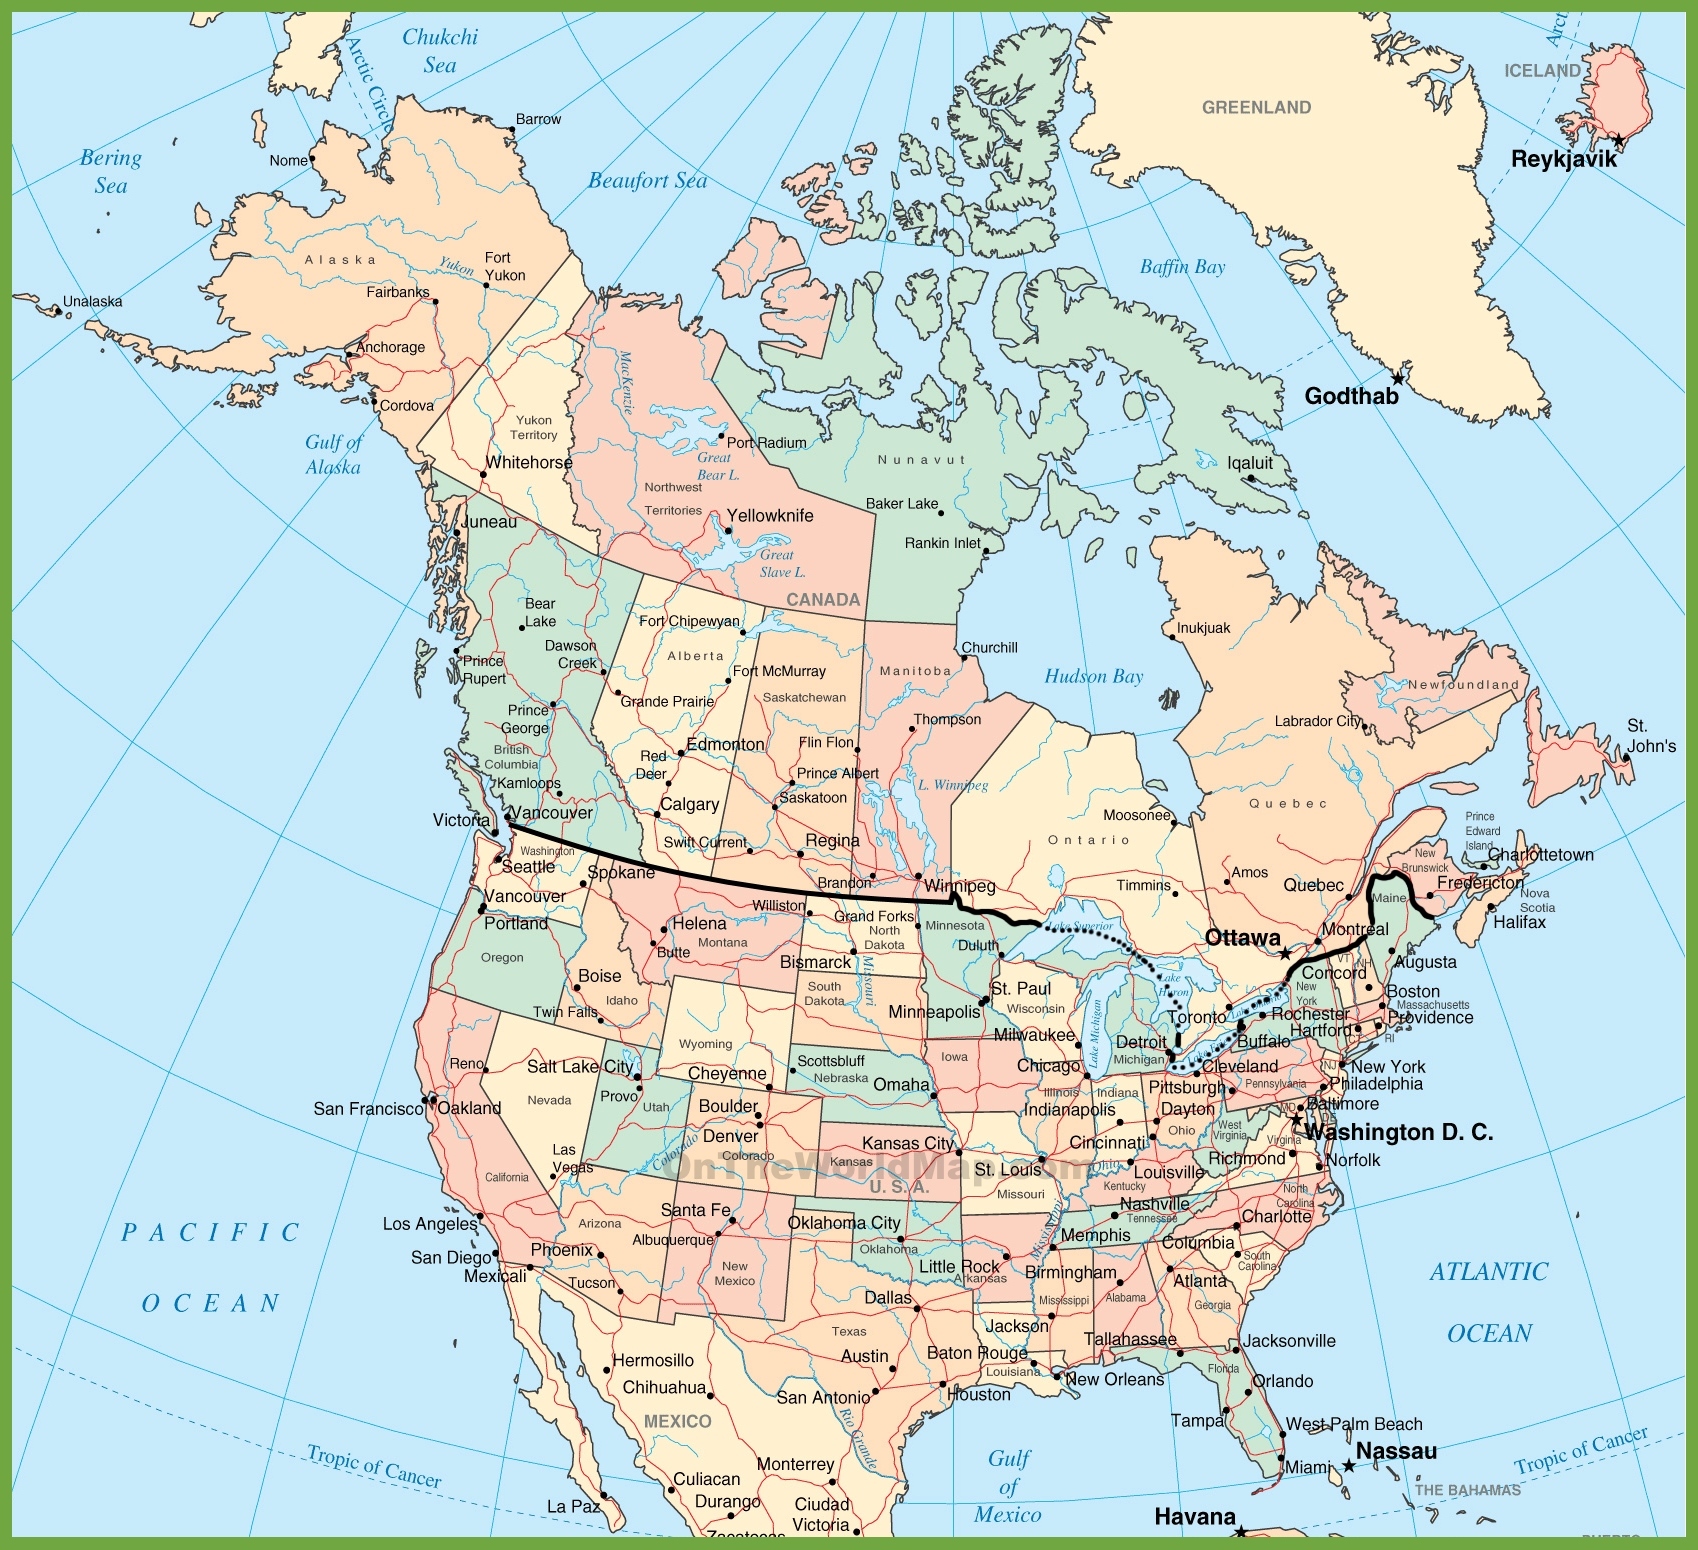 USA and Canada map ﻿